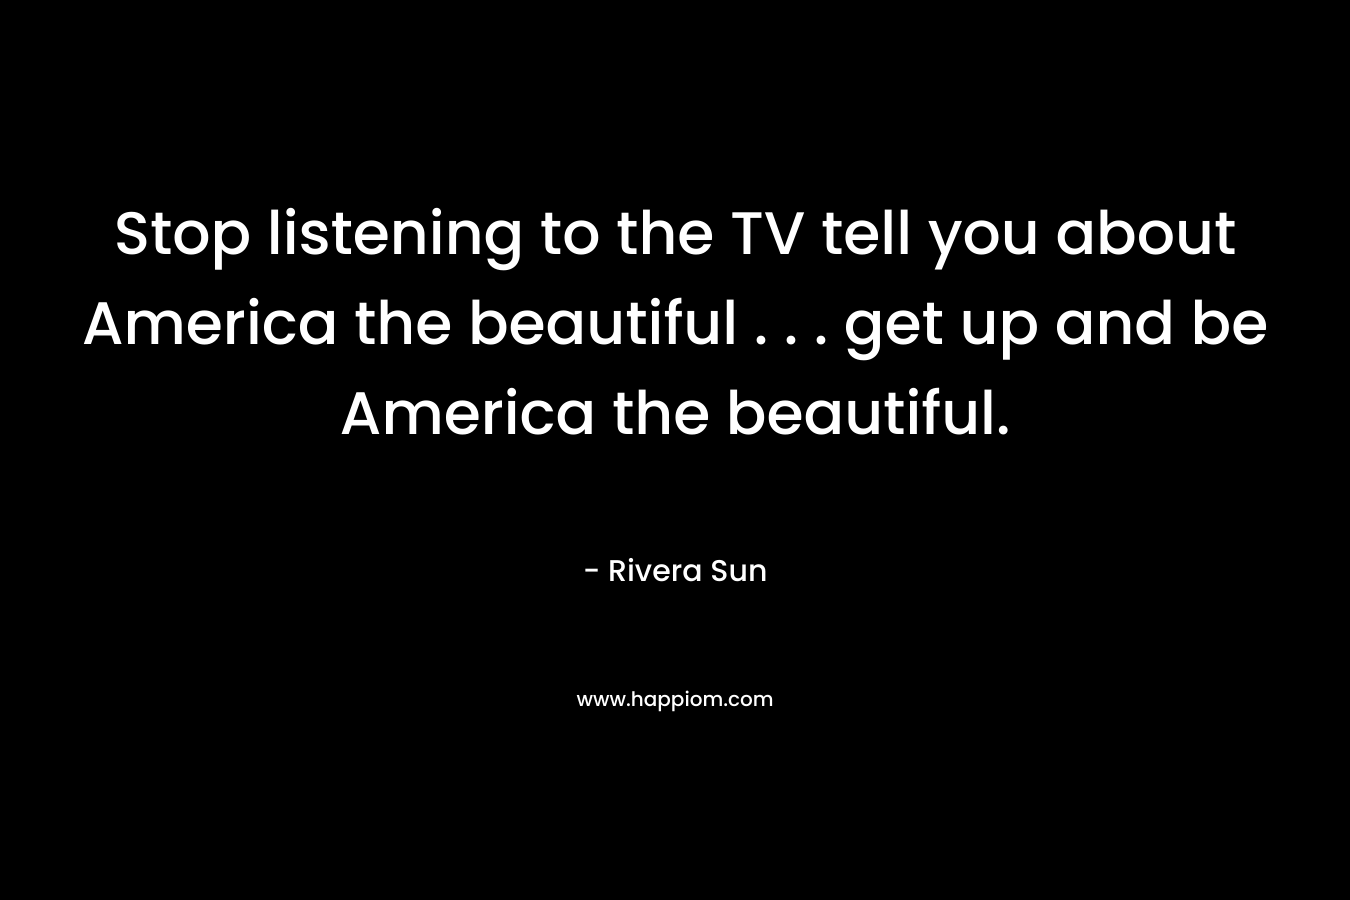 Stop listening to the TV tell you about America the beautiful . . . get up and be America the beautiful.